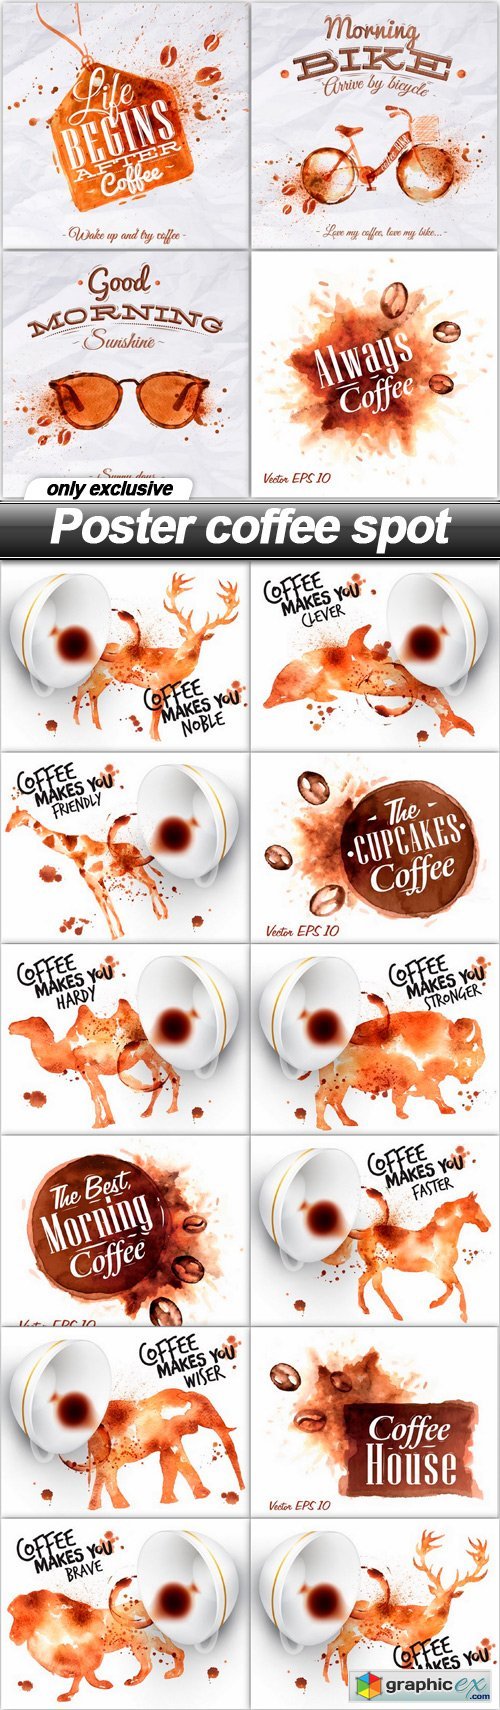 Poster coffee spot - 15 EPS